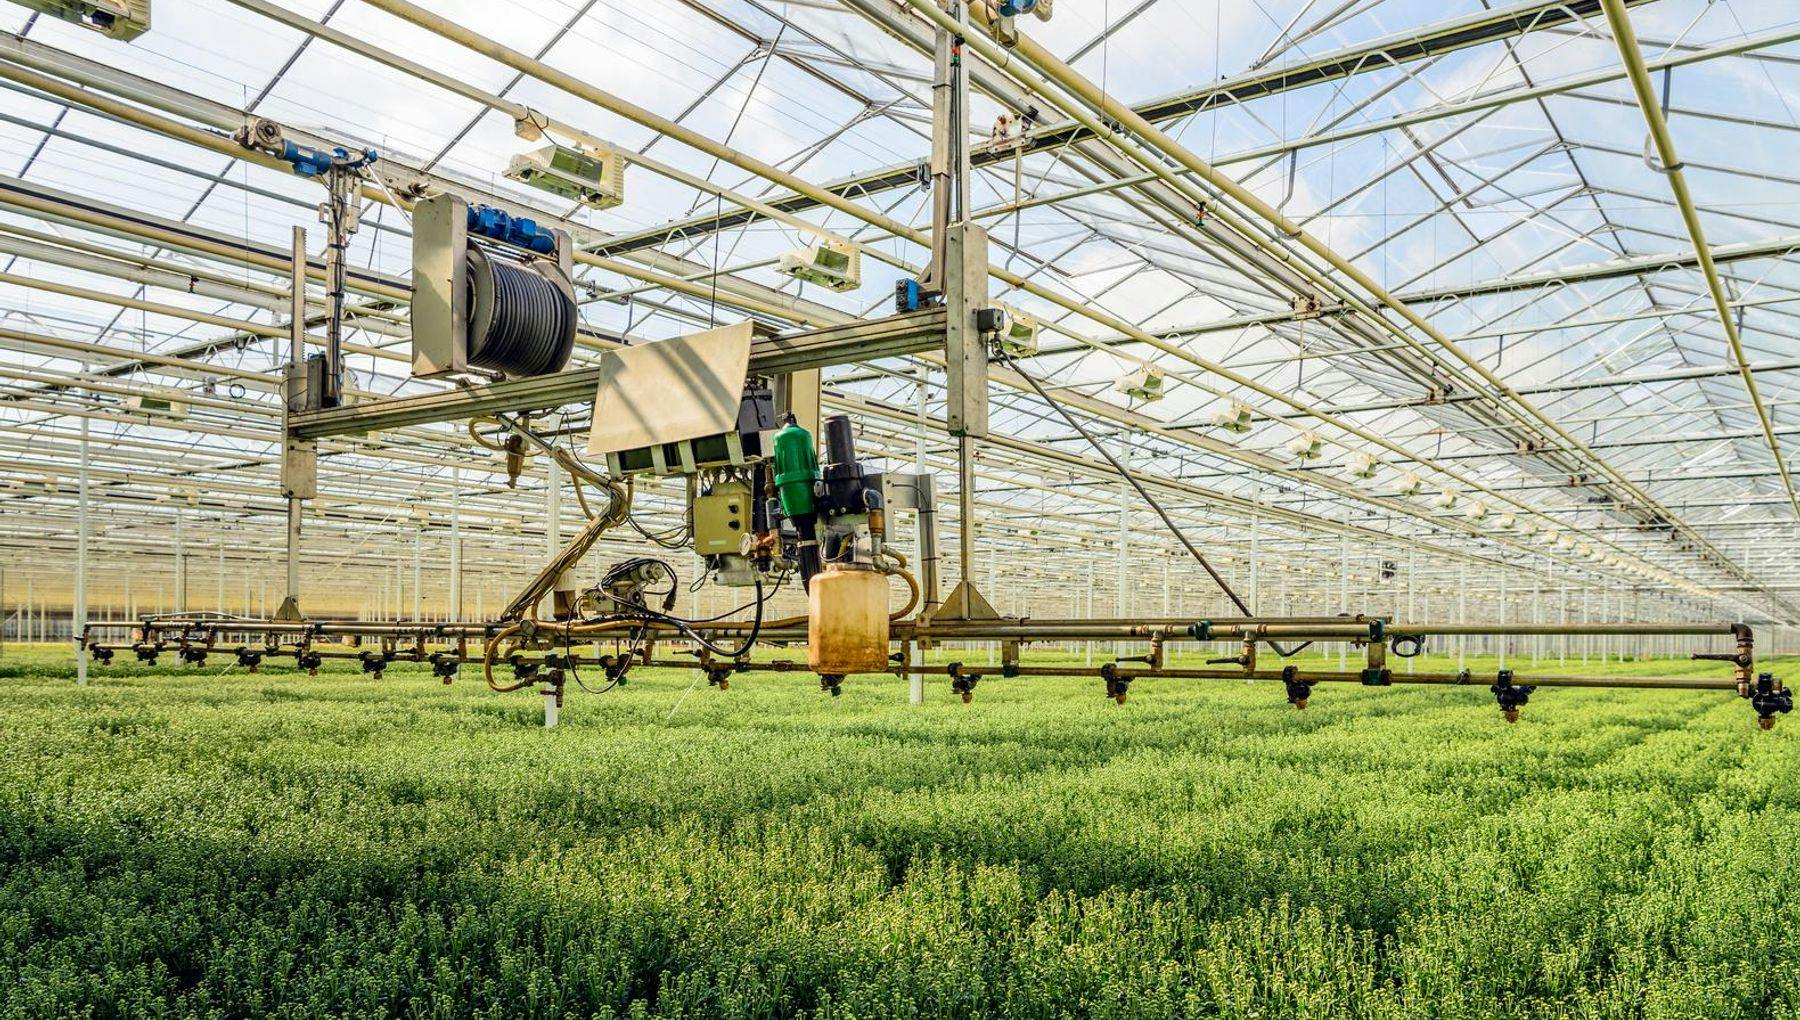 Semi-automatic spraying robot in a Dutch greenhouse specialized in the cultivation of chrysanthemum cut flowers.